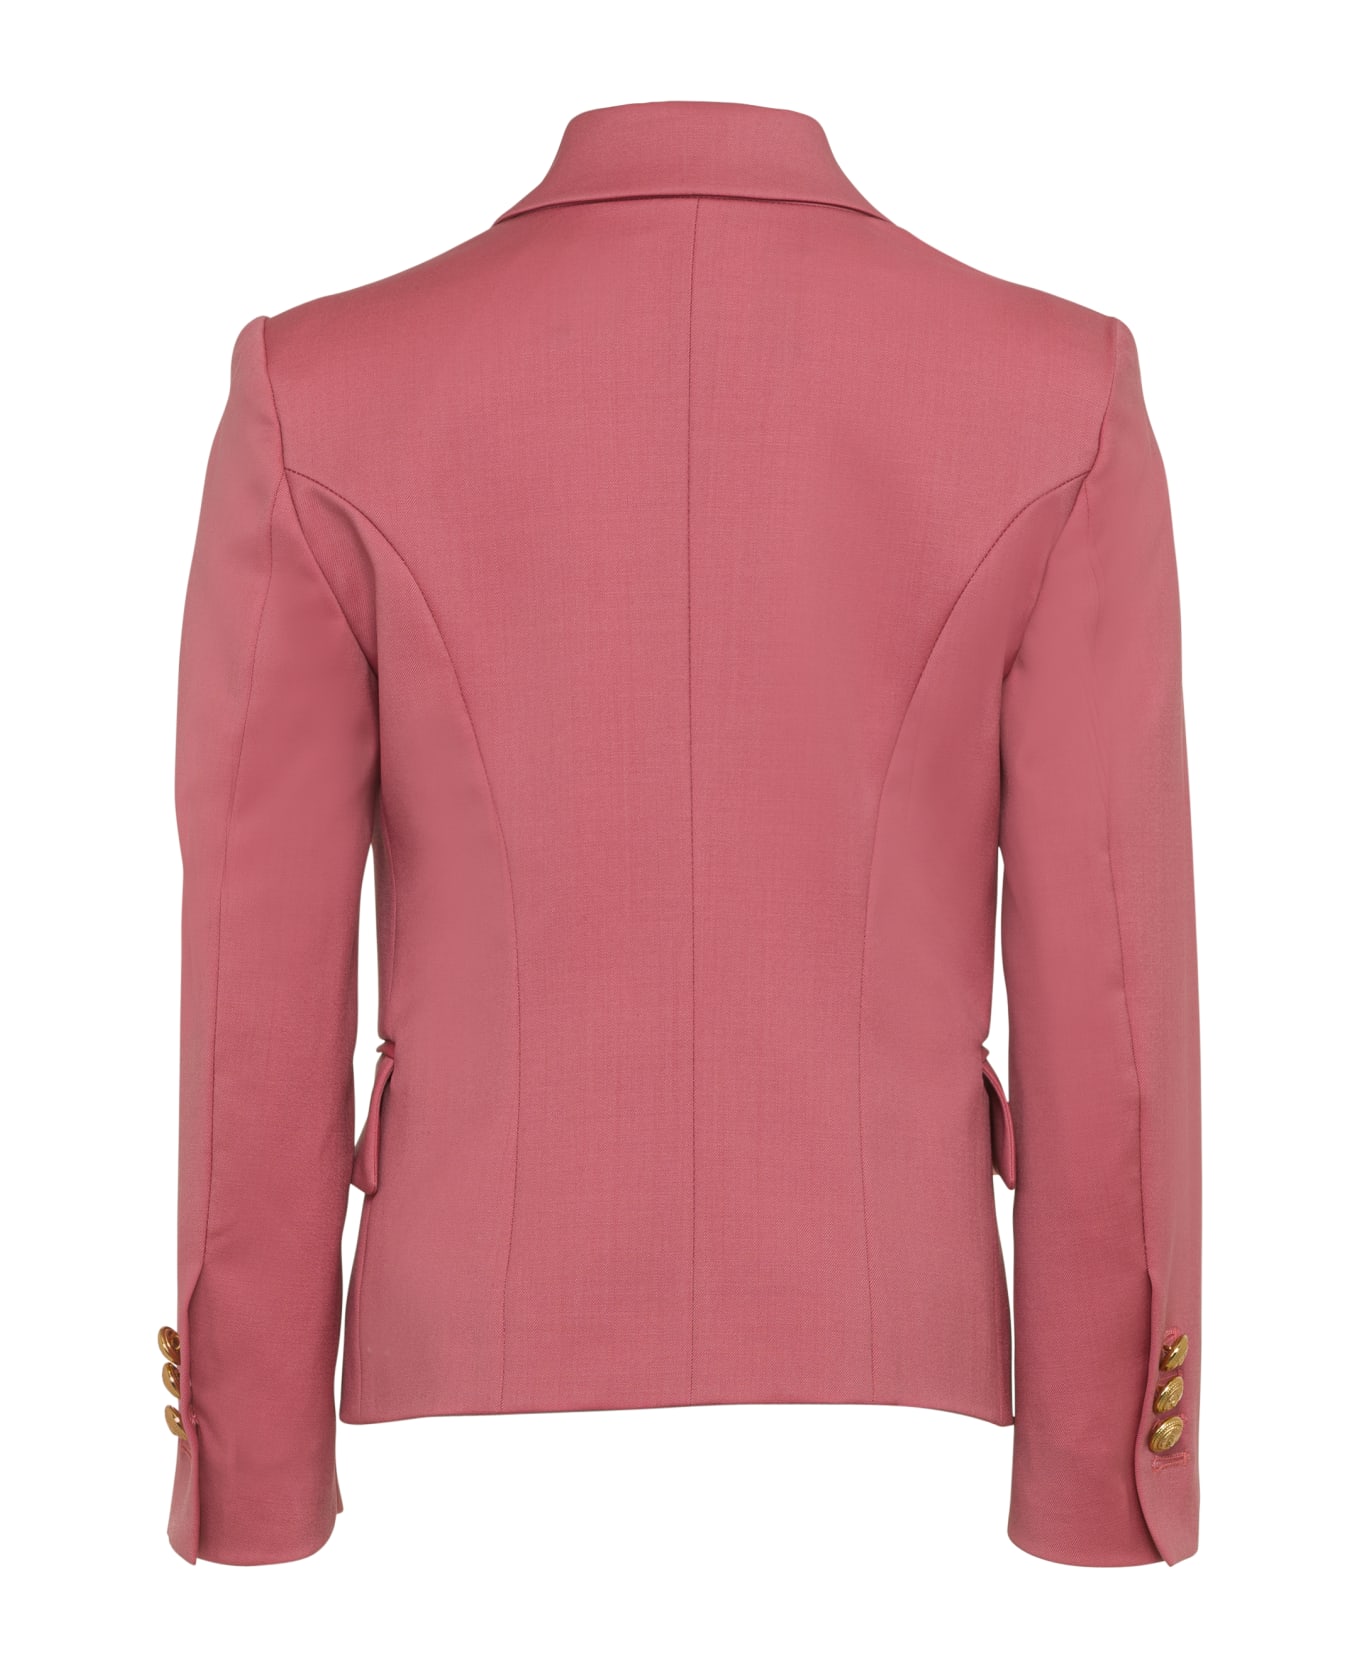 Balmain Pink Double Breasted Blazer - Pink